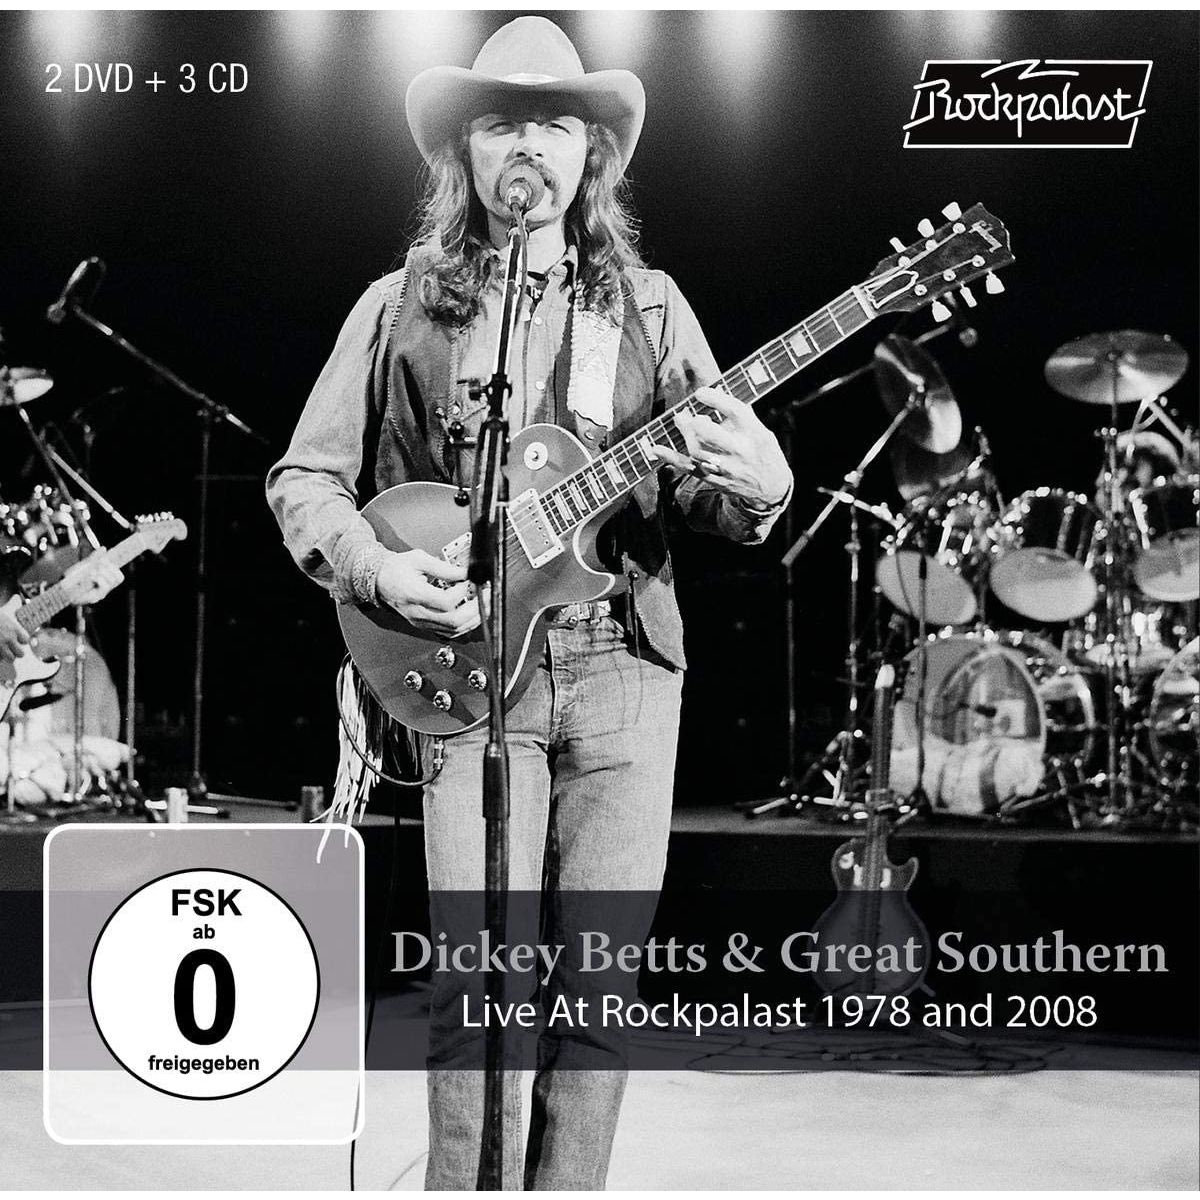 LIVE AT ROCKPALAST 1978 AND 2008 - 3 CD +2DVD